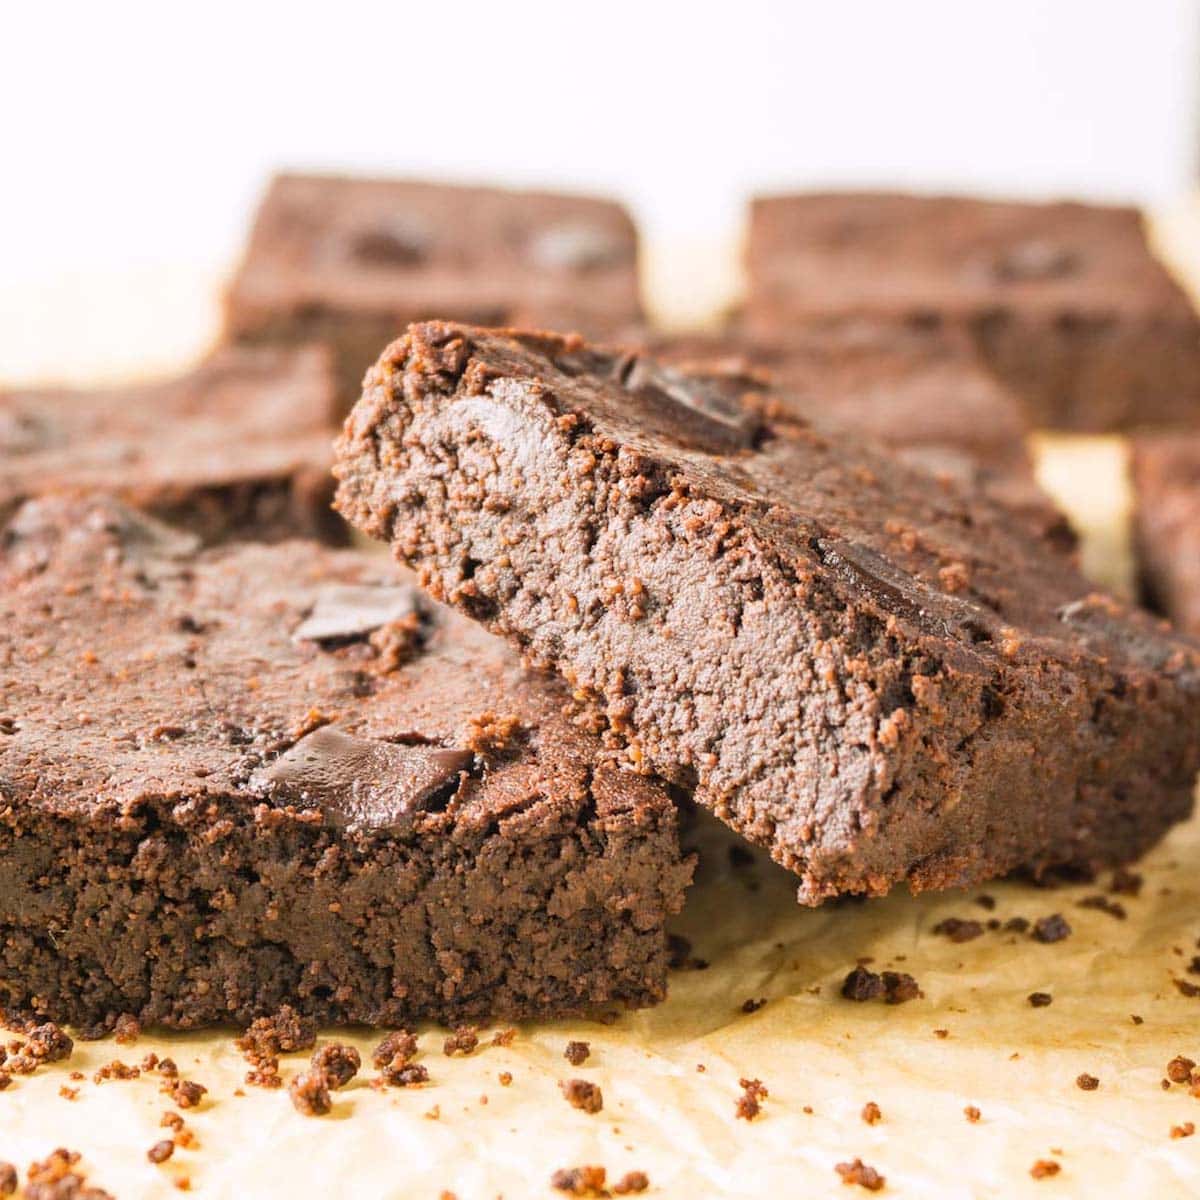 Close up image of fudge brownies on a brown parchment paper, more brownies on the background.